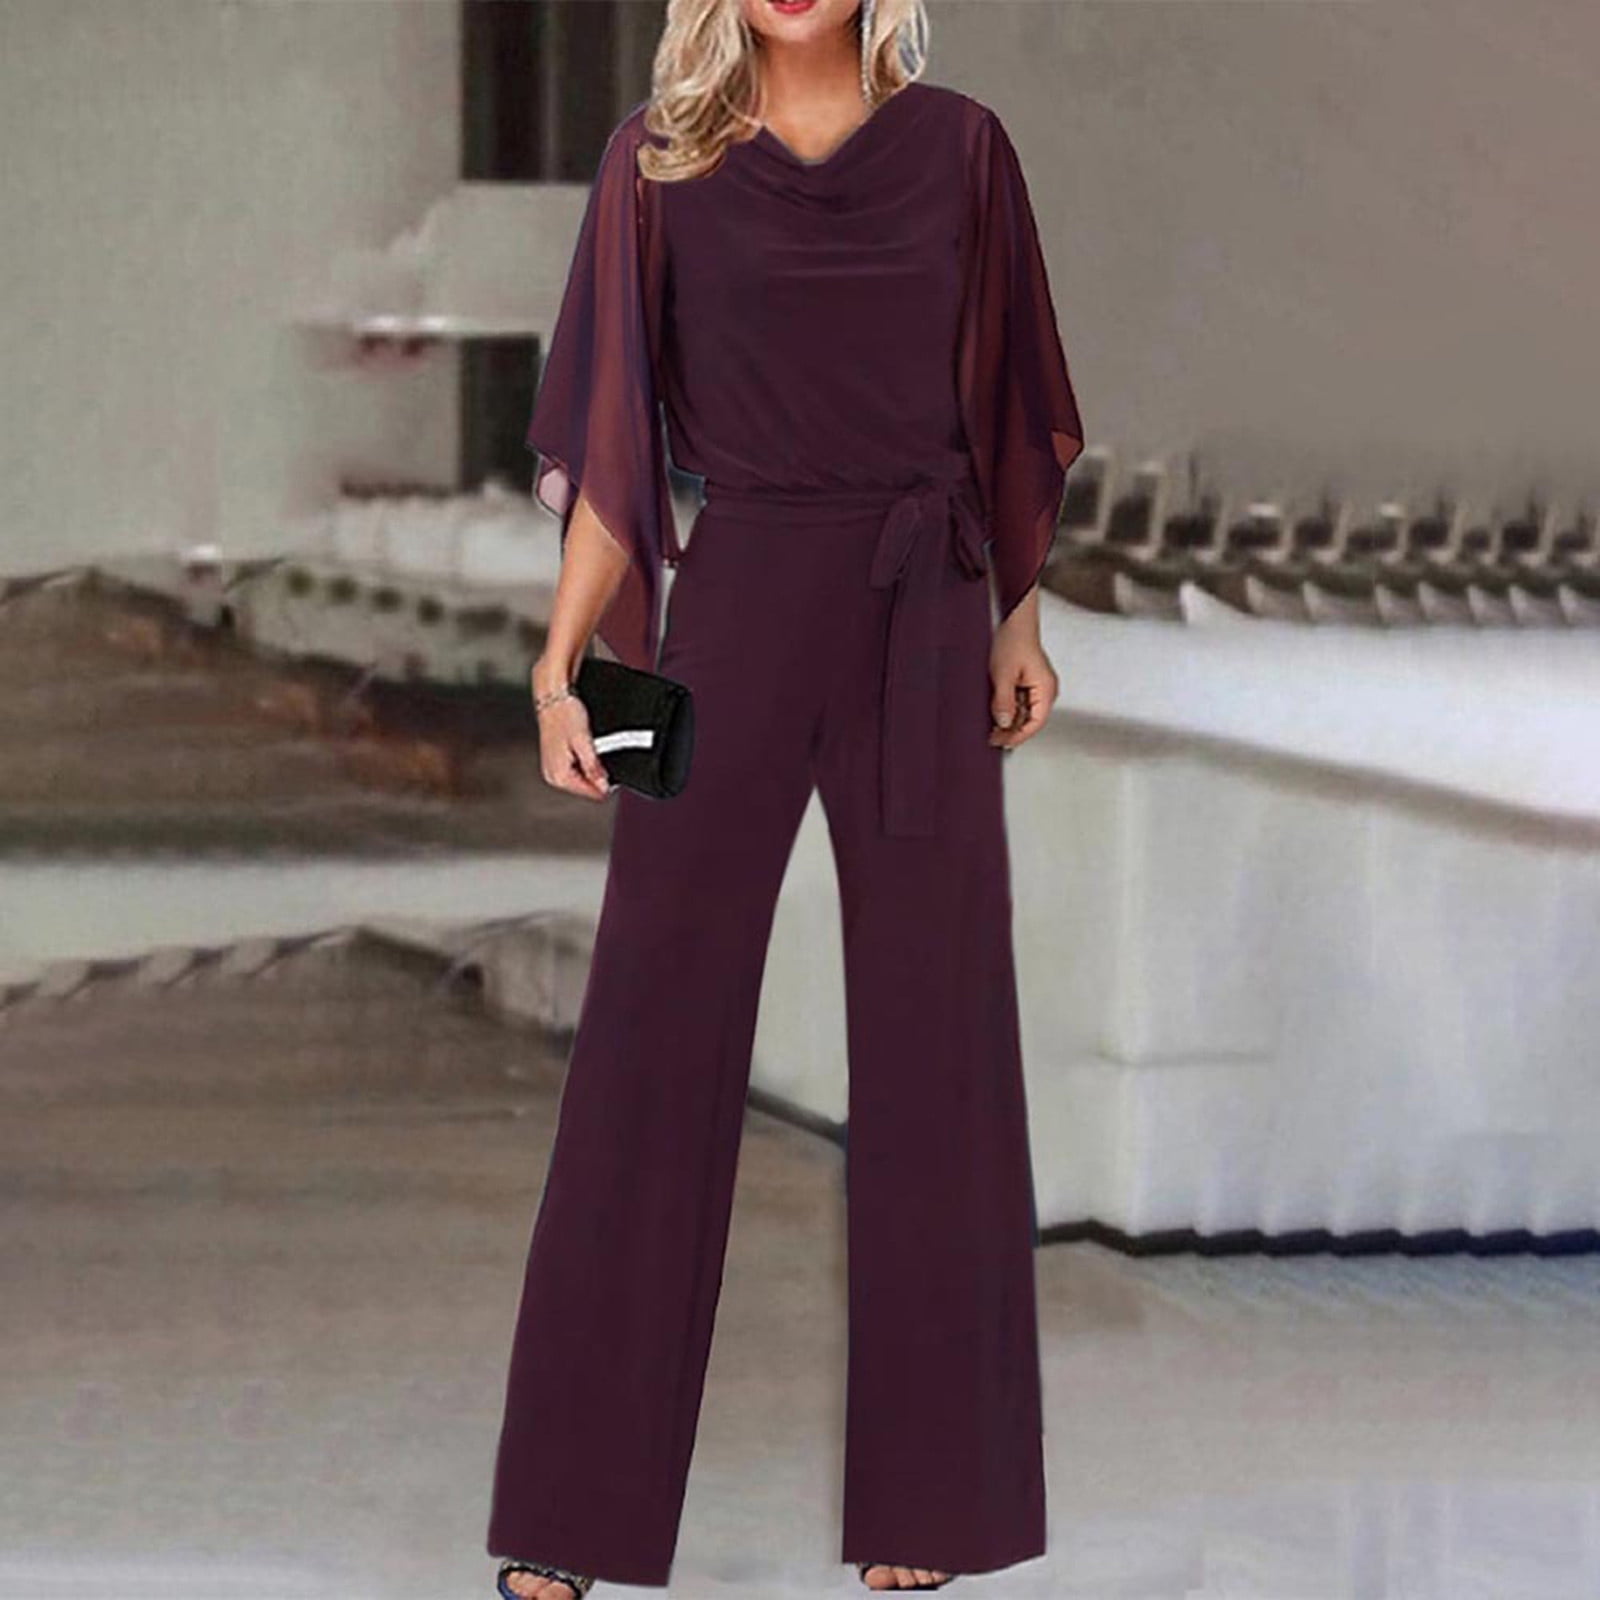 Formal Jumpsuits for Women Summer Sexy Off The Shoulder One Sleeve Jumpsuit  Side Slit Wide Leg Solid Cocktail Rompers